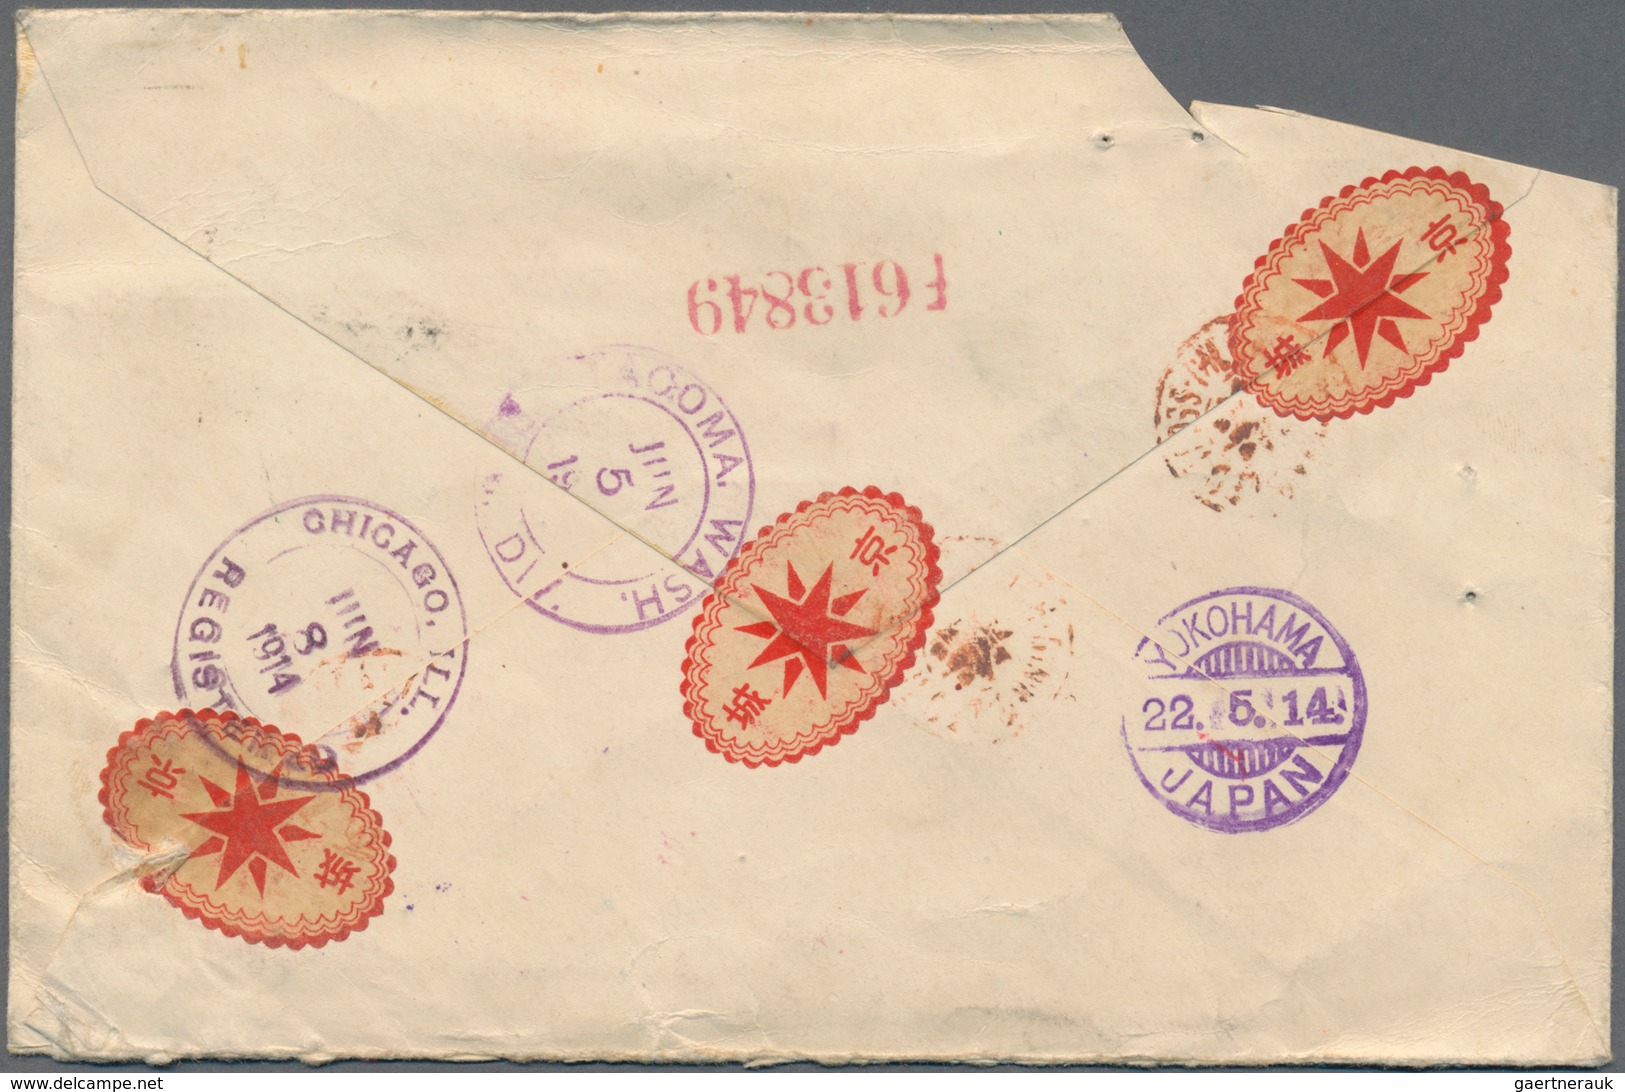 Japanische Post In Korea: 1910/19, Seoul Branches, Three Covers To Foreign: Registered At 20 S. Rate - Militaire Vrijstelling Van Portkosten